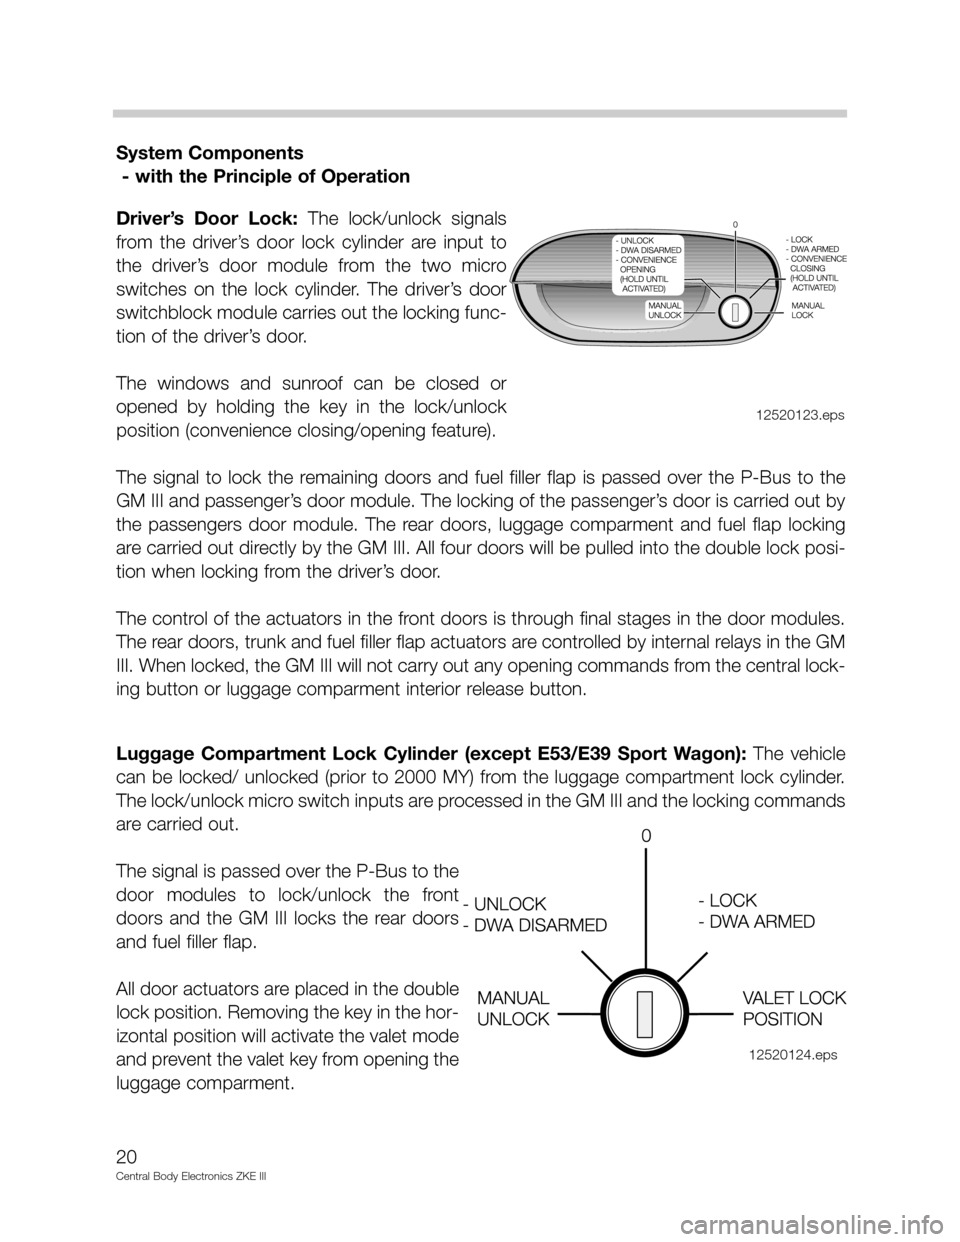 BMW 525I 1999 E39 Central Body Electronics ZKE Manual System Components 
- with the Principle of Operation
Driver’s  Door  Lock: The  lock/unlock  signals
from  the  driver’s  door  lock  cylinder  are  input  to
the  driver’s  door  module  from  